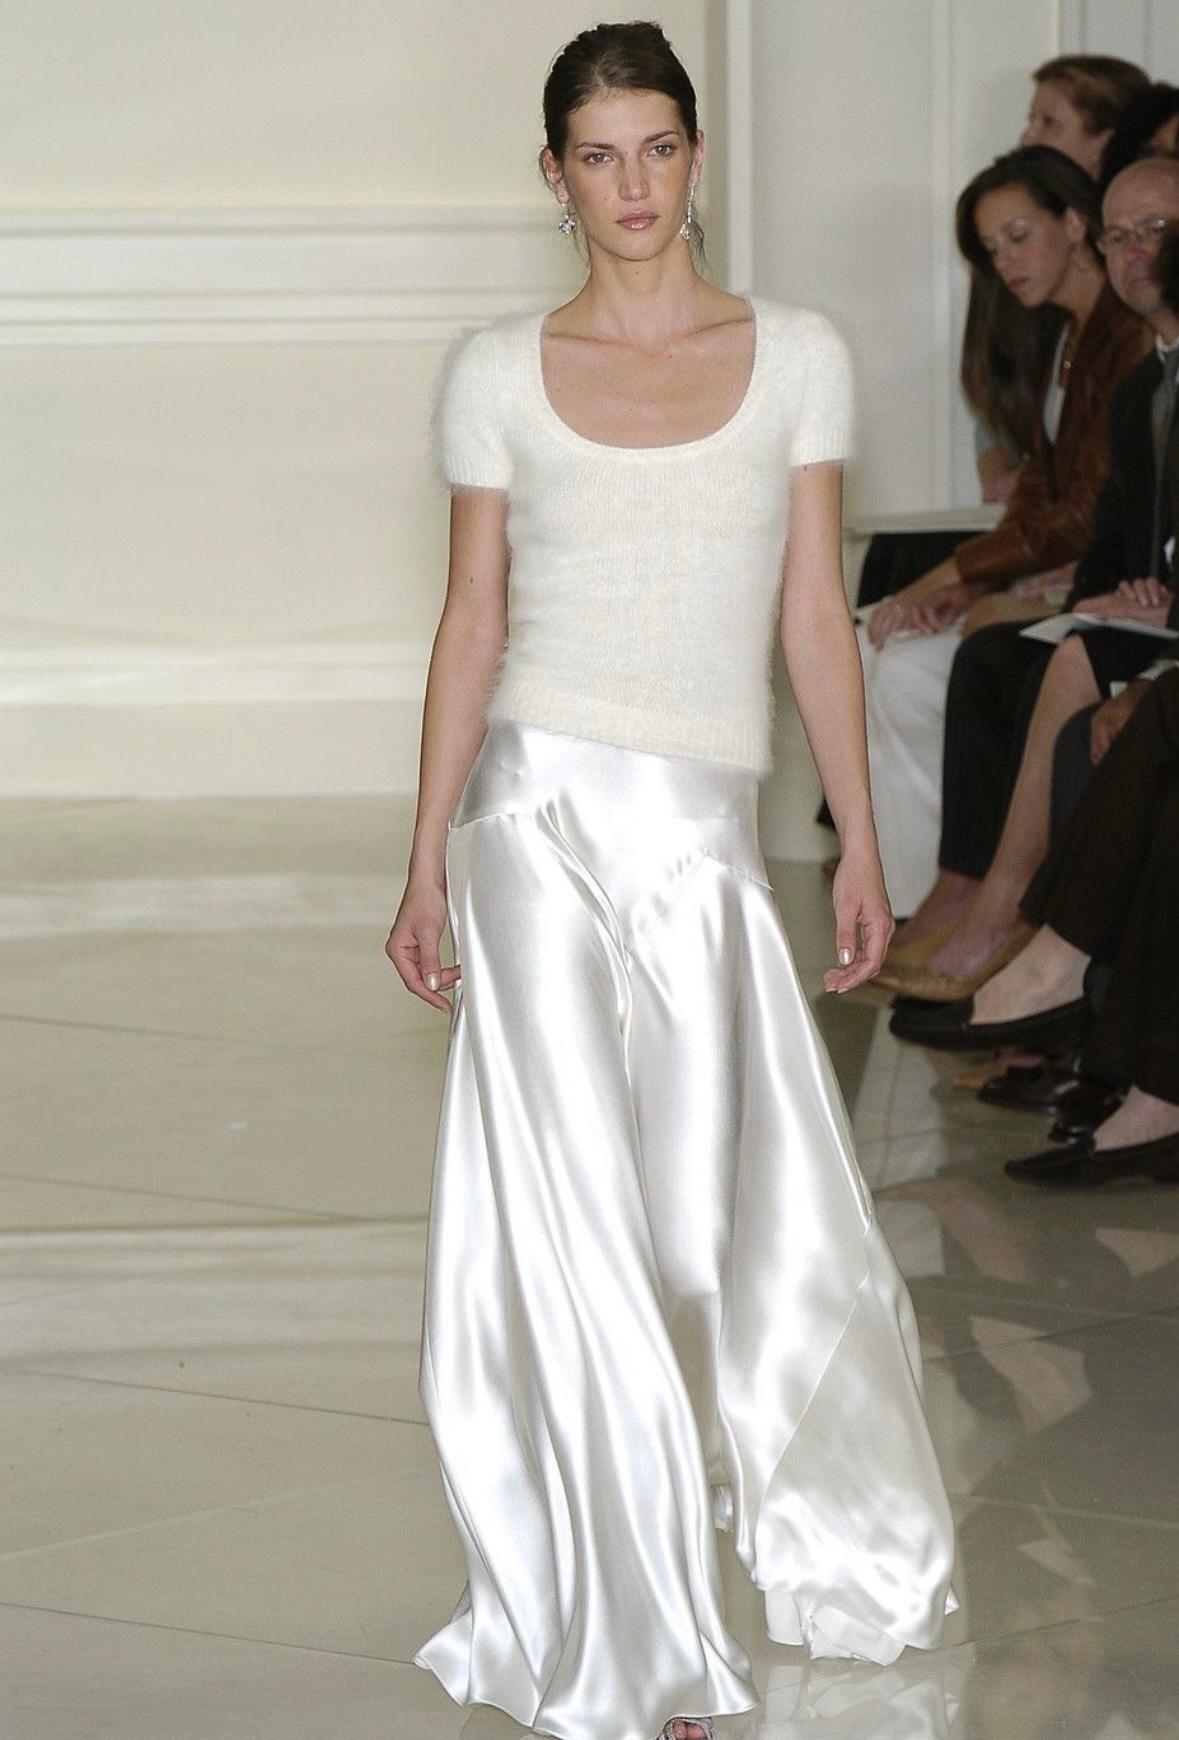 From Ralph Lauren's Spring/Summer 2005 collection, this stunning white satin full-length skirt debuted on the season's runway as part of look 35 modeled by Diana Dondoe. The satin finish gives this white skirt a pearl-like finish, allowing it to